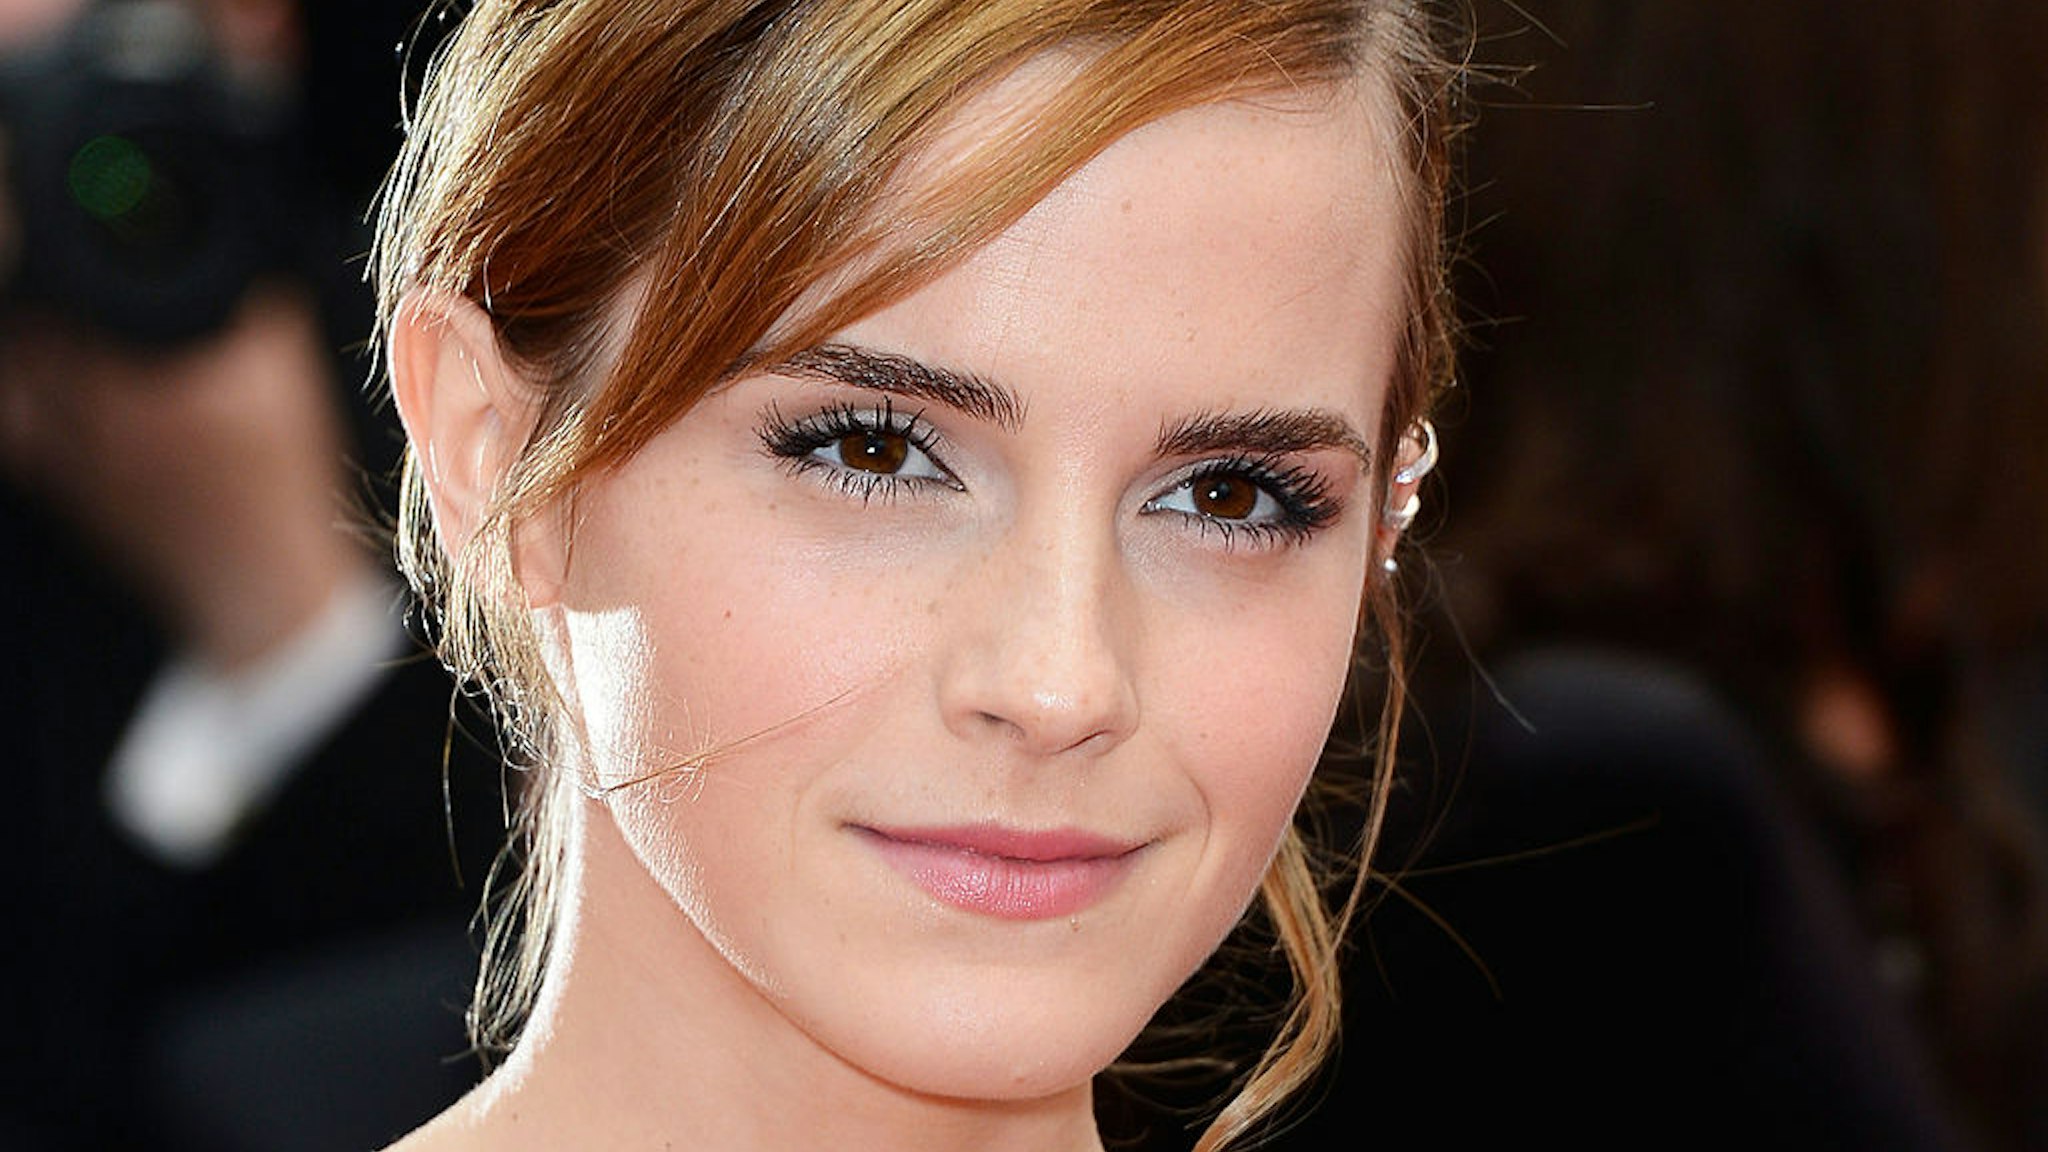 CANNES, FRANCE - MAY 16: Actress Emma Watson attends 'The Bling Ring' premiere during The 66th Annual Cannes Film Festival at the Palais des Festivals on May 16, 2013 in Cannes, France. (Photo by Pascal Le Segretain/Getty Images)